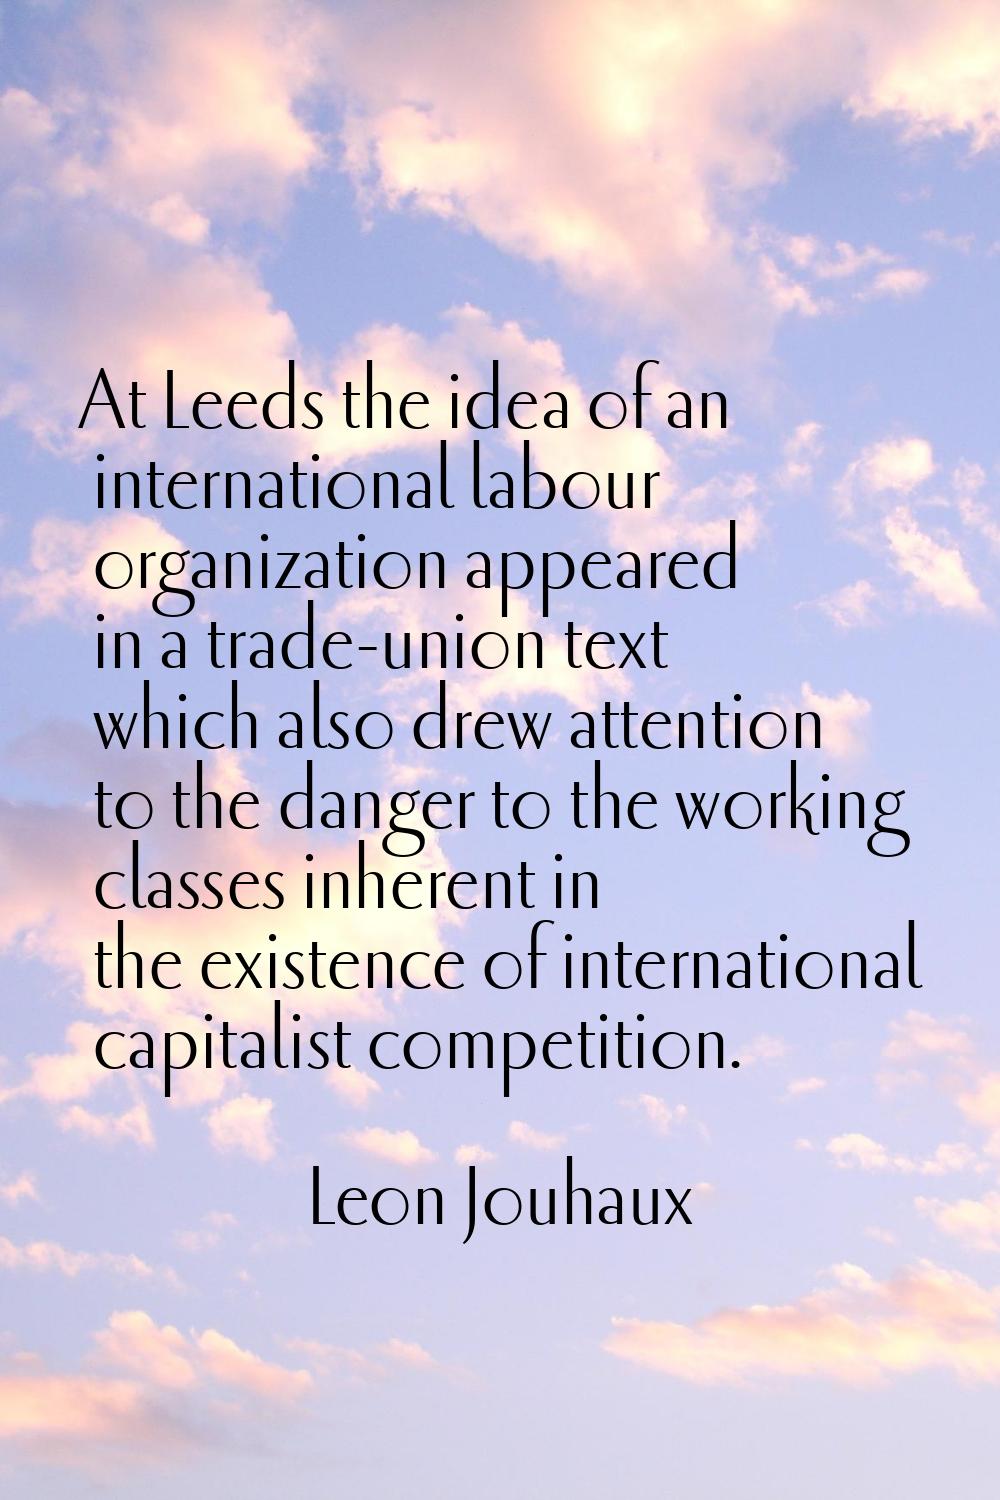 At Leeds the idea of an international labour organization appeared in a trade-union text which also